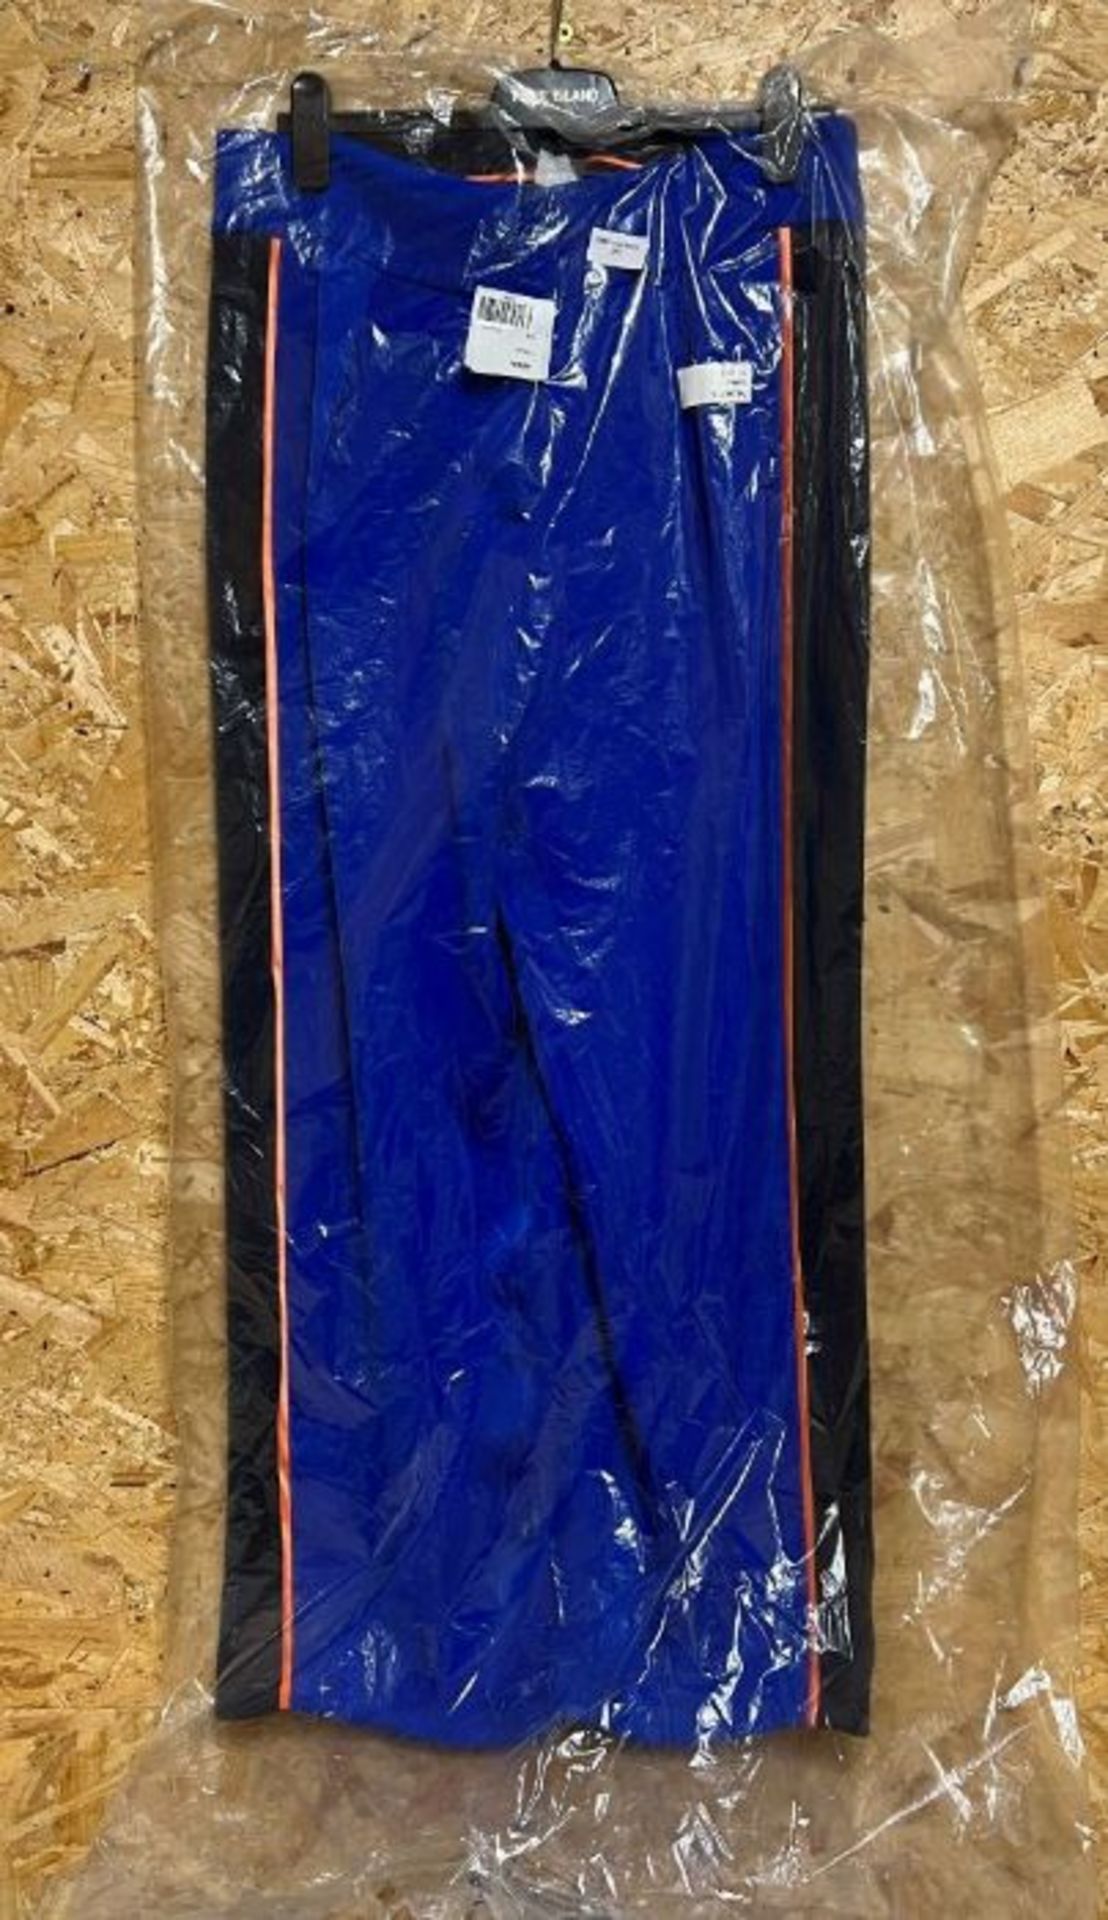 1 X LUXW SATIN JOGGER PANEL TROUSE-BLUE / SIZE UK 16 / RRP £195.00 /BRAND NEW WITH TAGS